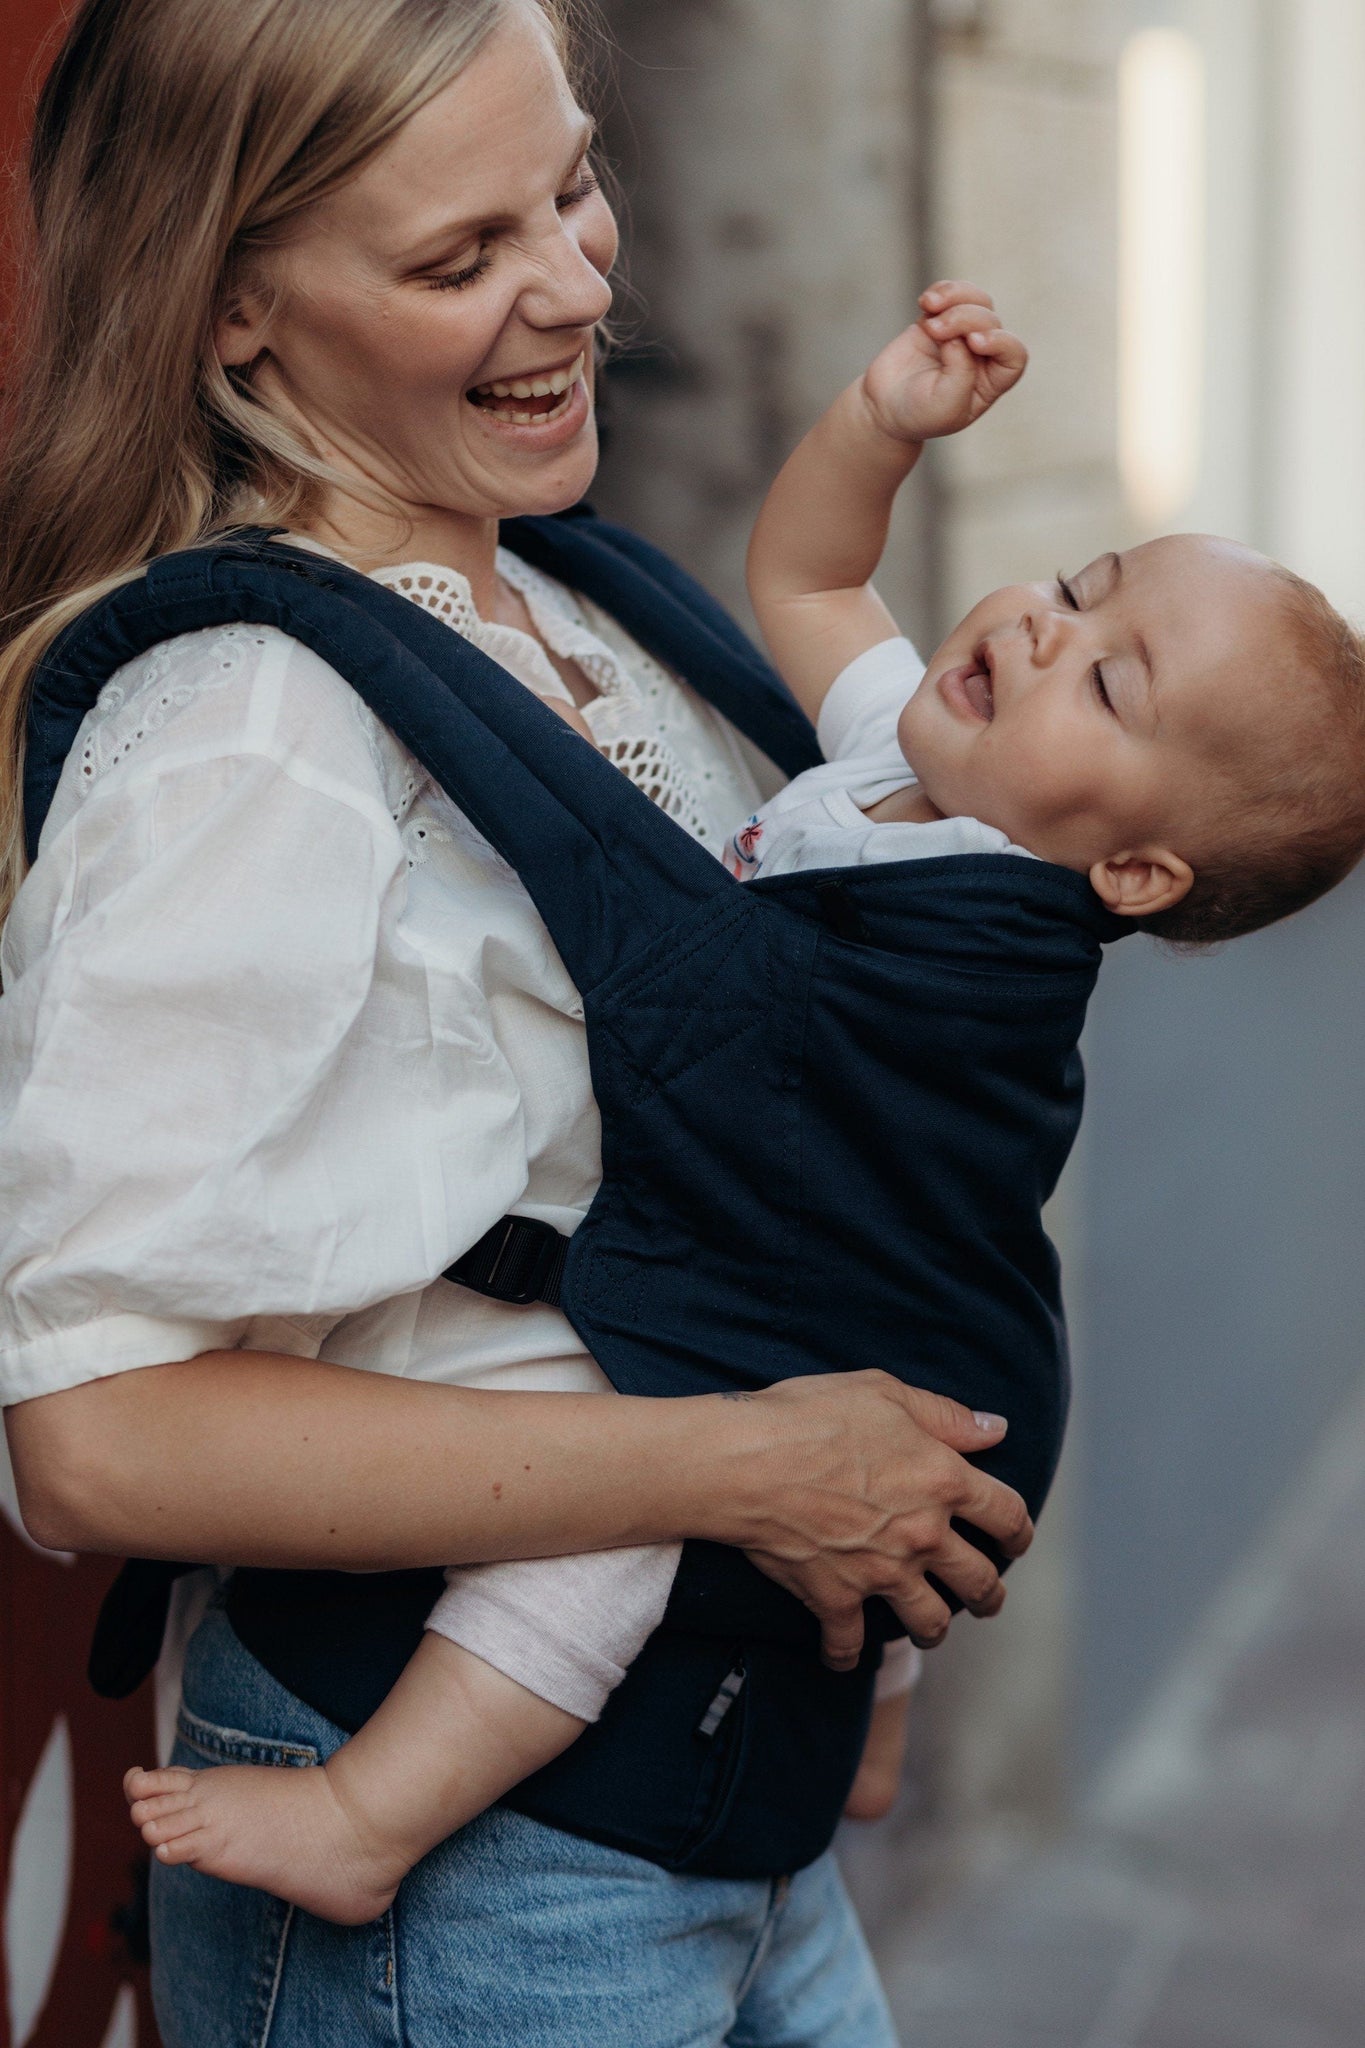 Boba classic baby carrier Navy. Our streamlined soft structured baby carrier is designed to go and grow with your little one. This ergonomic front facing baby carrier is ready to use from infant to toddler.